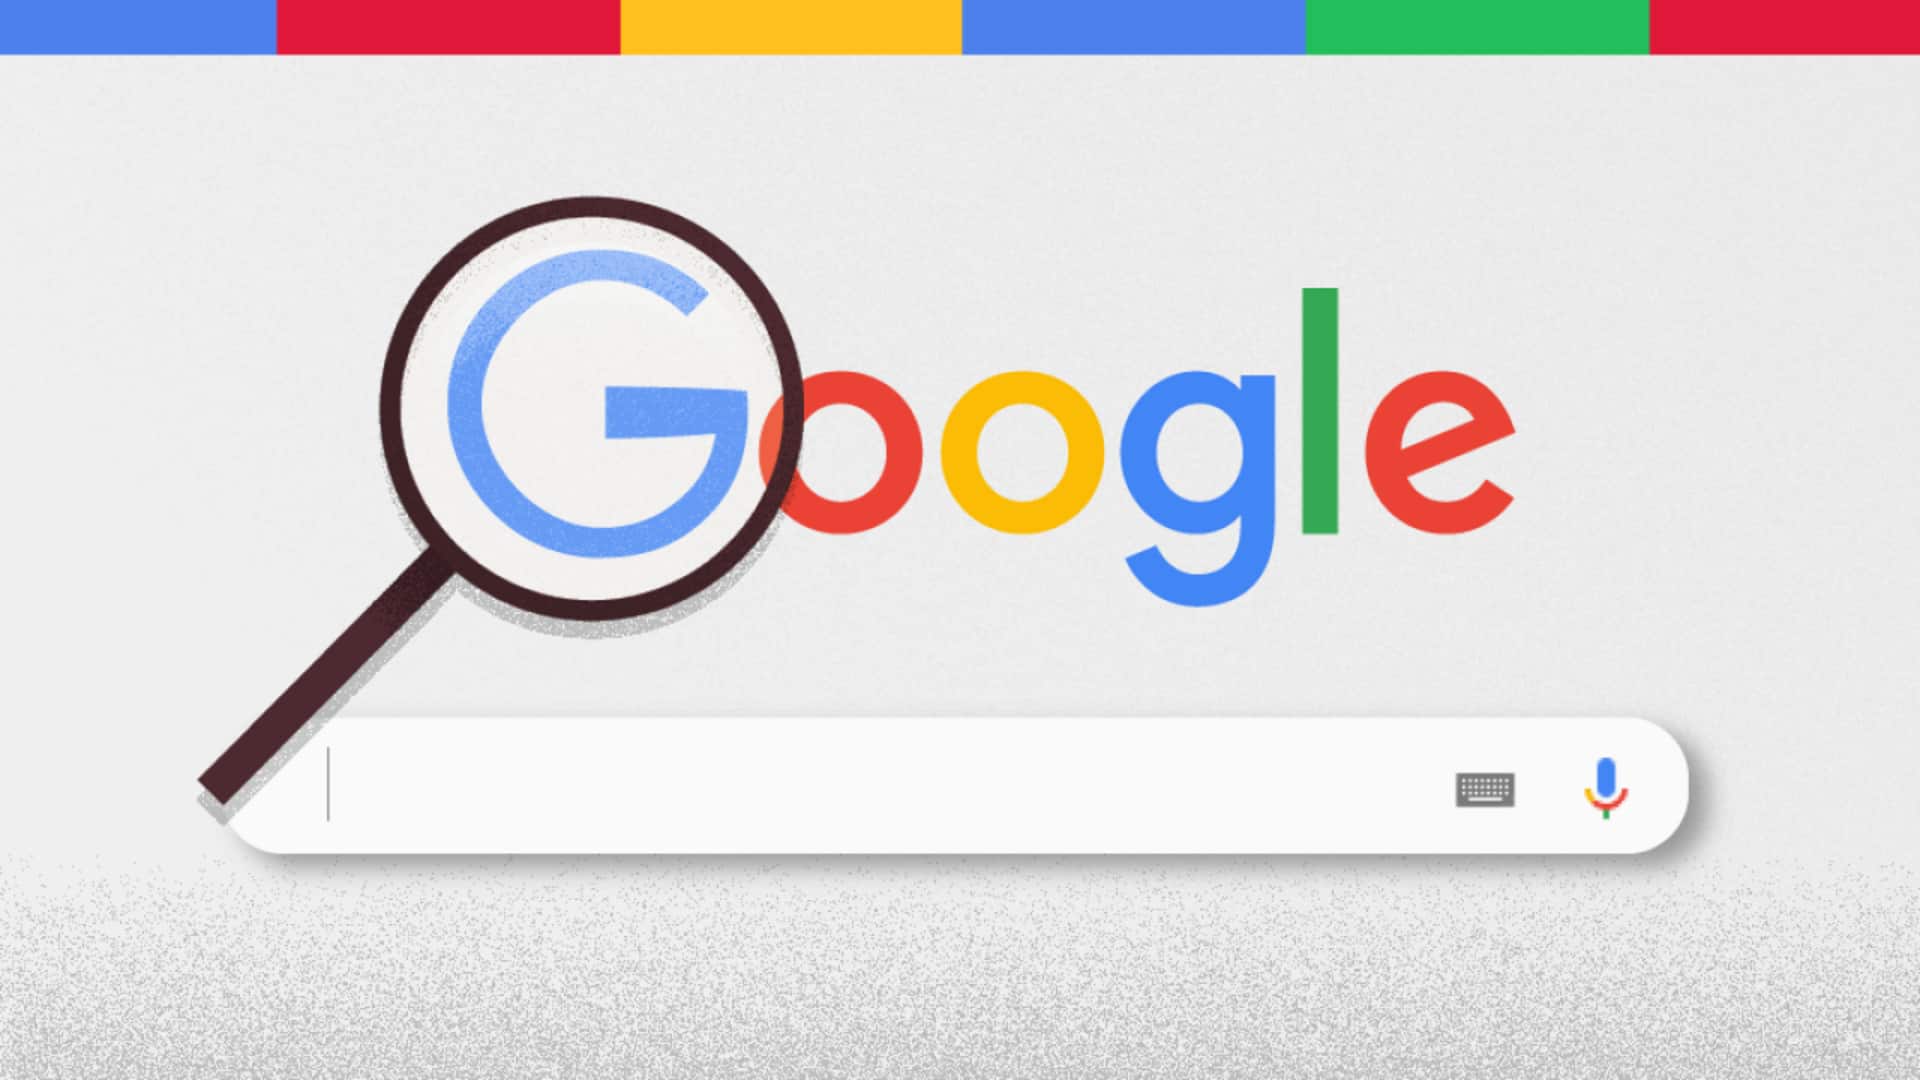 Google might soon allow custom search engine selection: Here's why